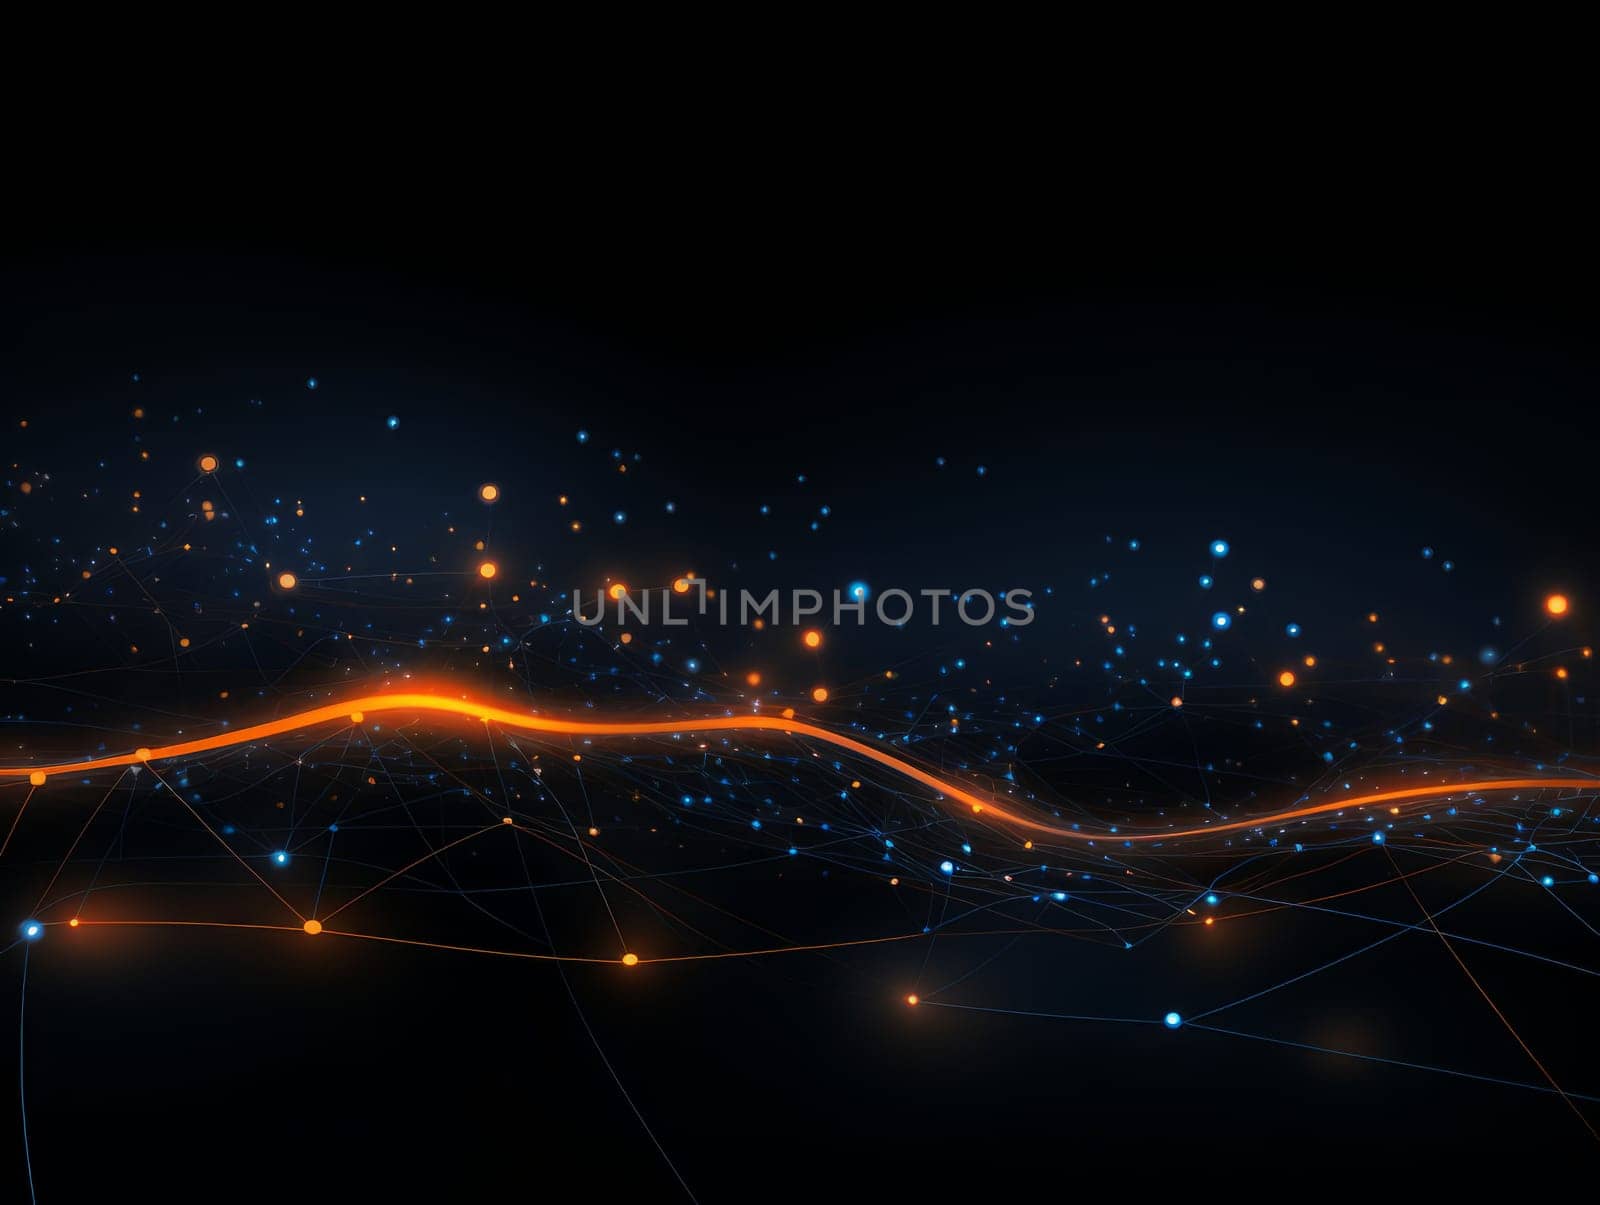 Abstract technology, blue and orange neon background of lines and dots, science and technology business concept of digital future technologies. AI